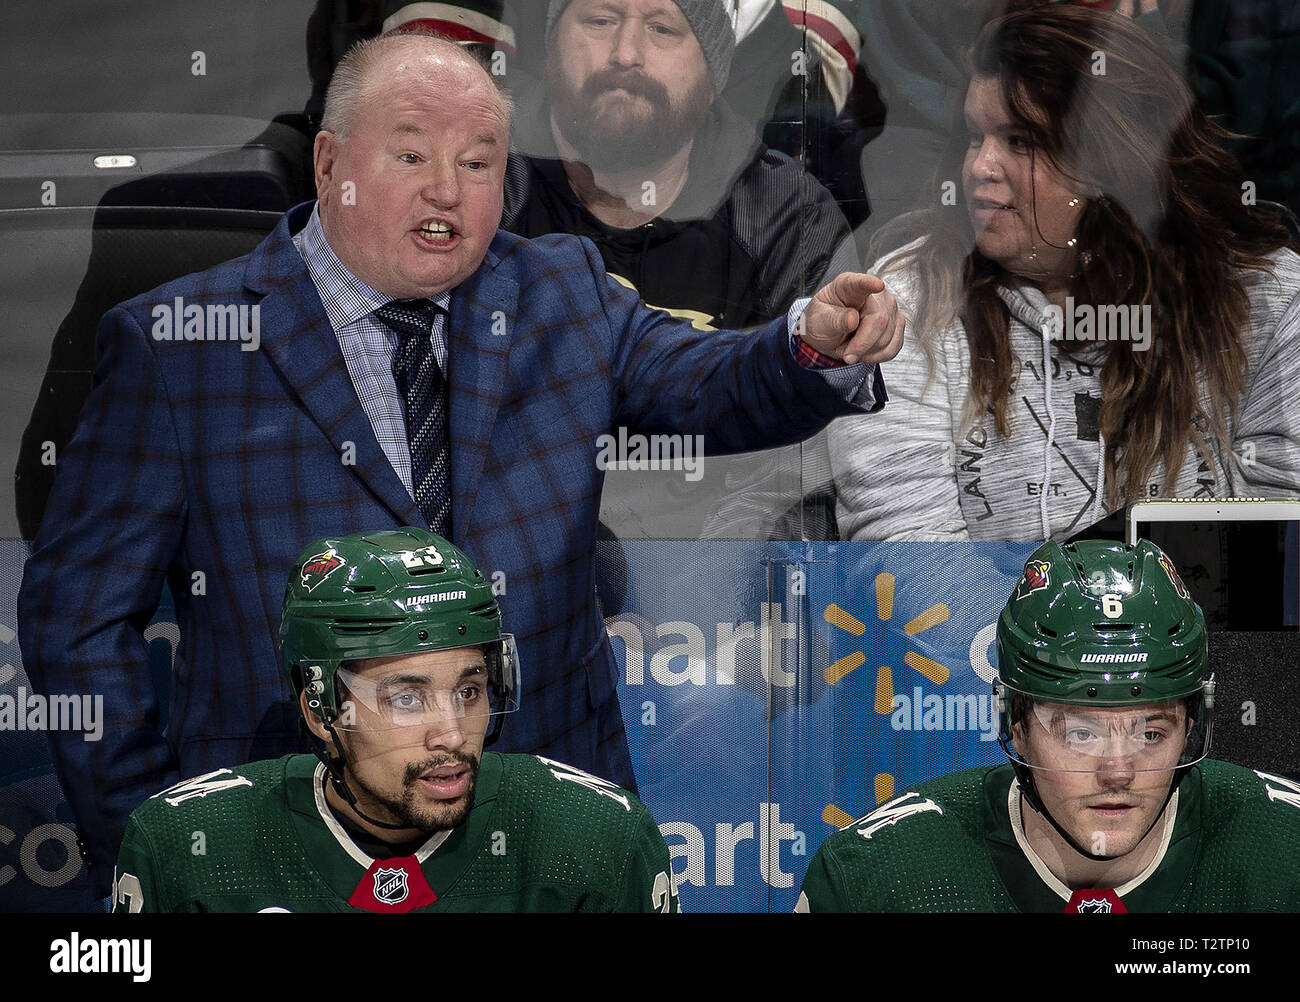 St. Paul, MN, USA. 24th Feb, 2019. Minnesota Wild head coach Bruce Boudreau in the third period against the St. Louis Blues on February 24, 2019, at Xcel Energy Center in St. Paul, Minn. On Tuesday, April 2, 2019, the Wild defeated the visiting Winnipeg Jets, 5-1. Credit: Carlos Gonzalez/Minneapolis Star Tribune/ZUMA Wire/Alamy Live News Stock Photo